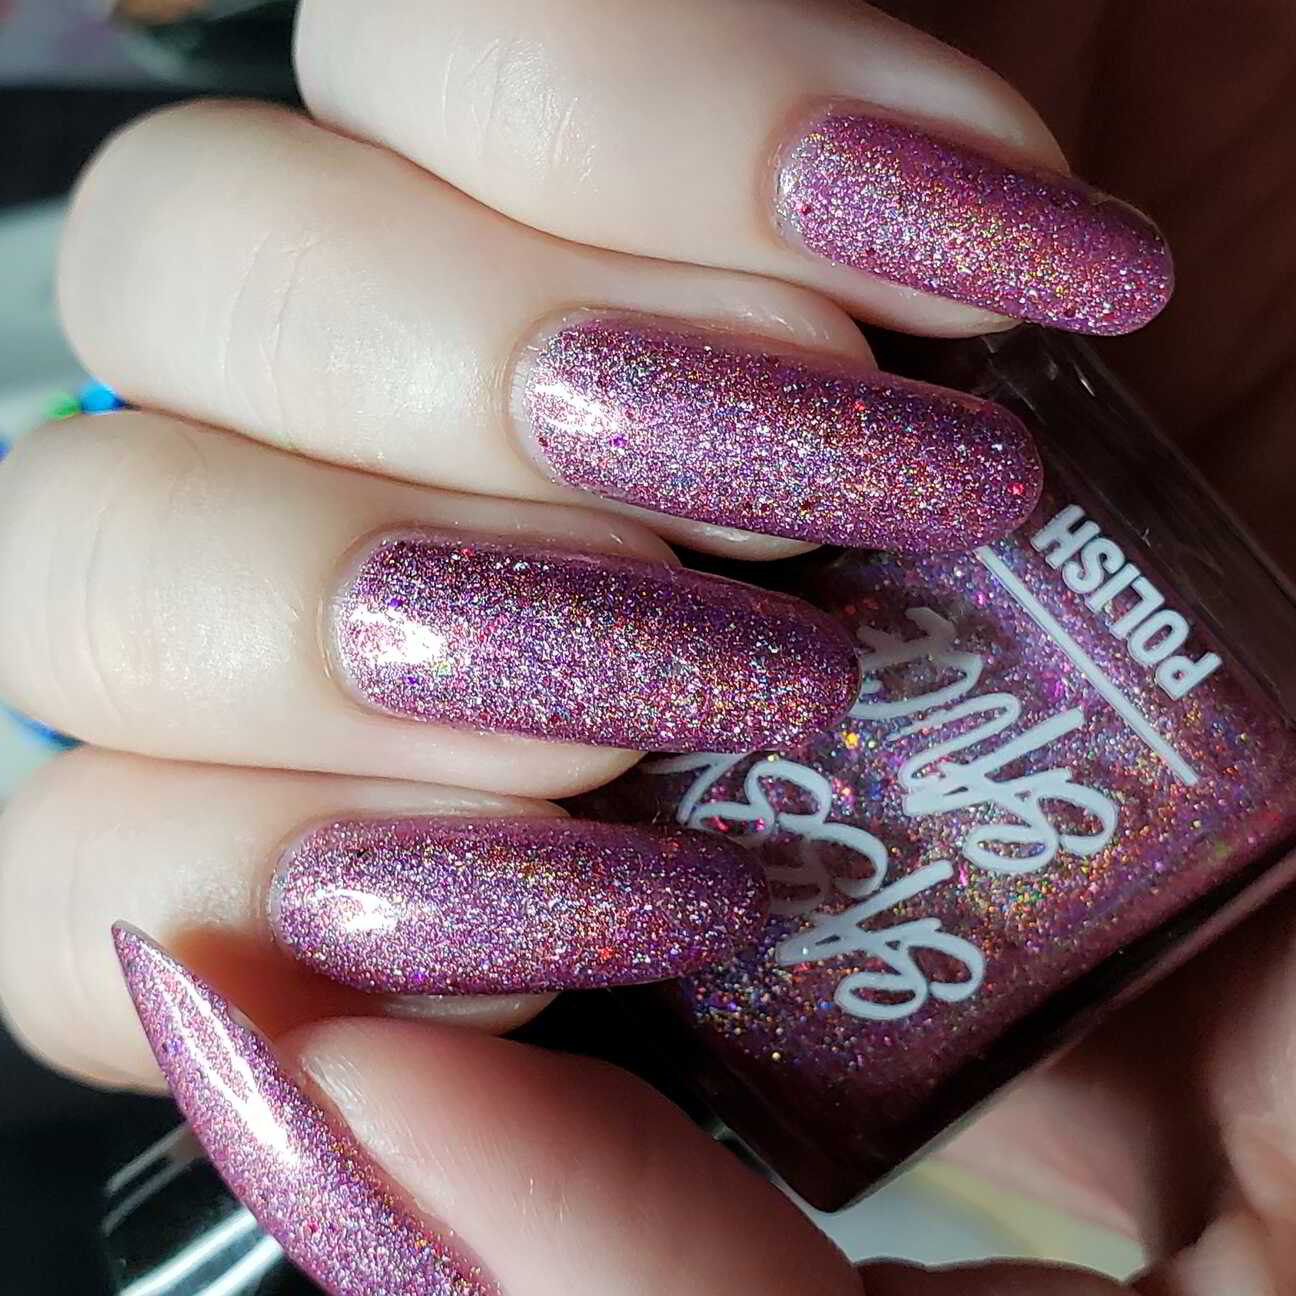 Nail polish manicure of shade Sassy Sauce Polish Who Are You Wearing, Seche Vite,Baby Girl Lacquer Glitter Be Gone